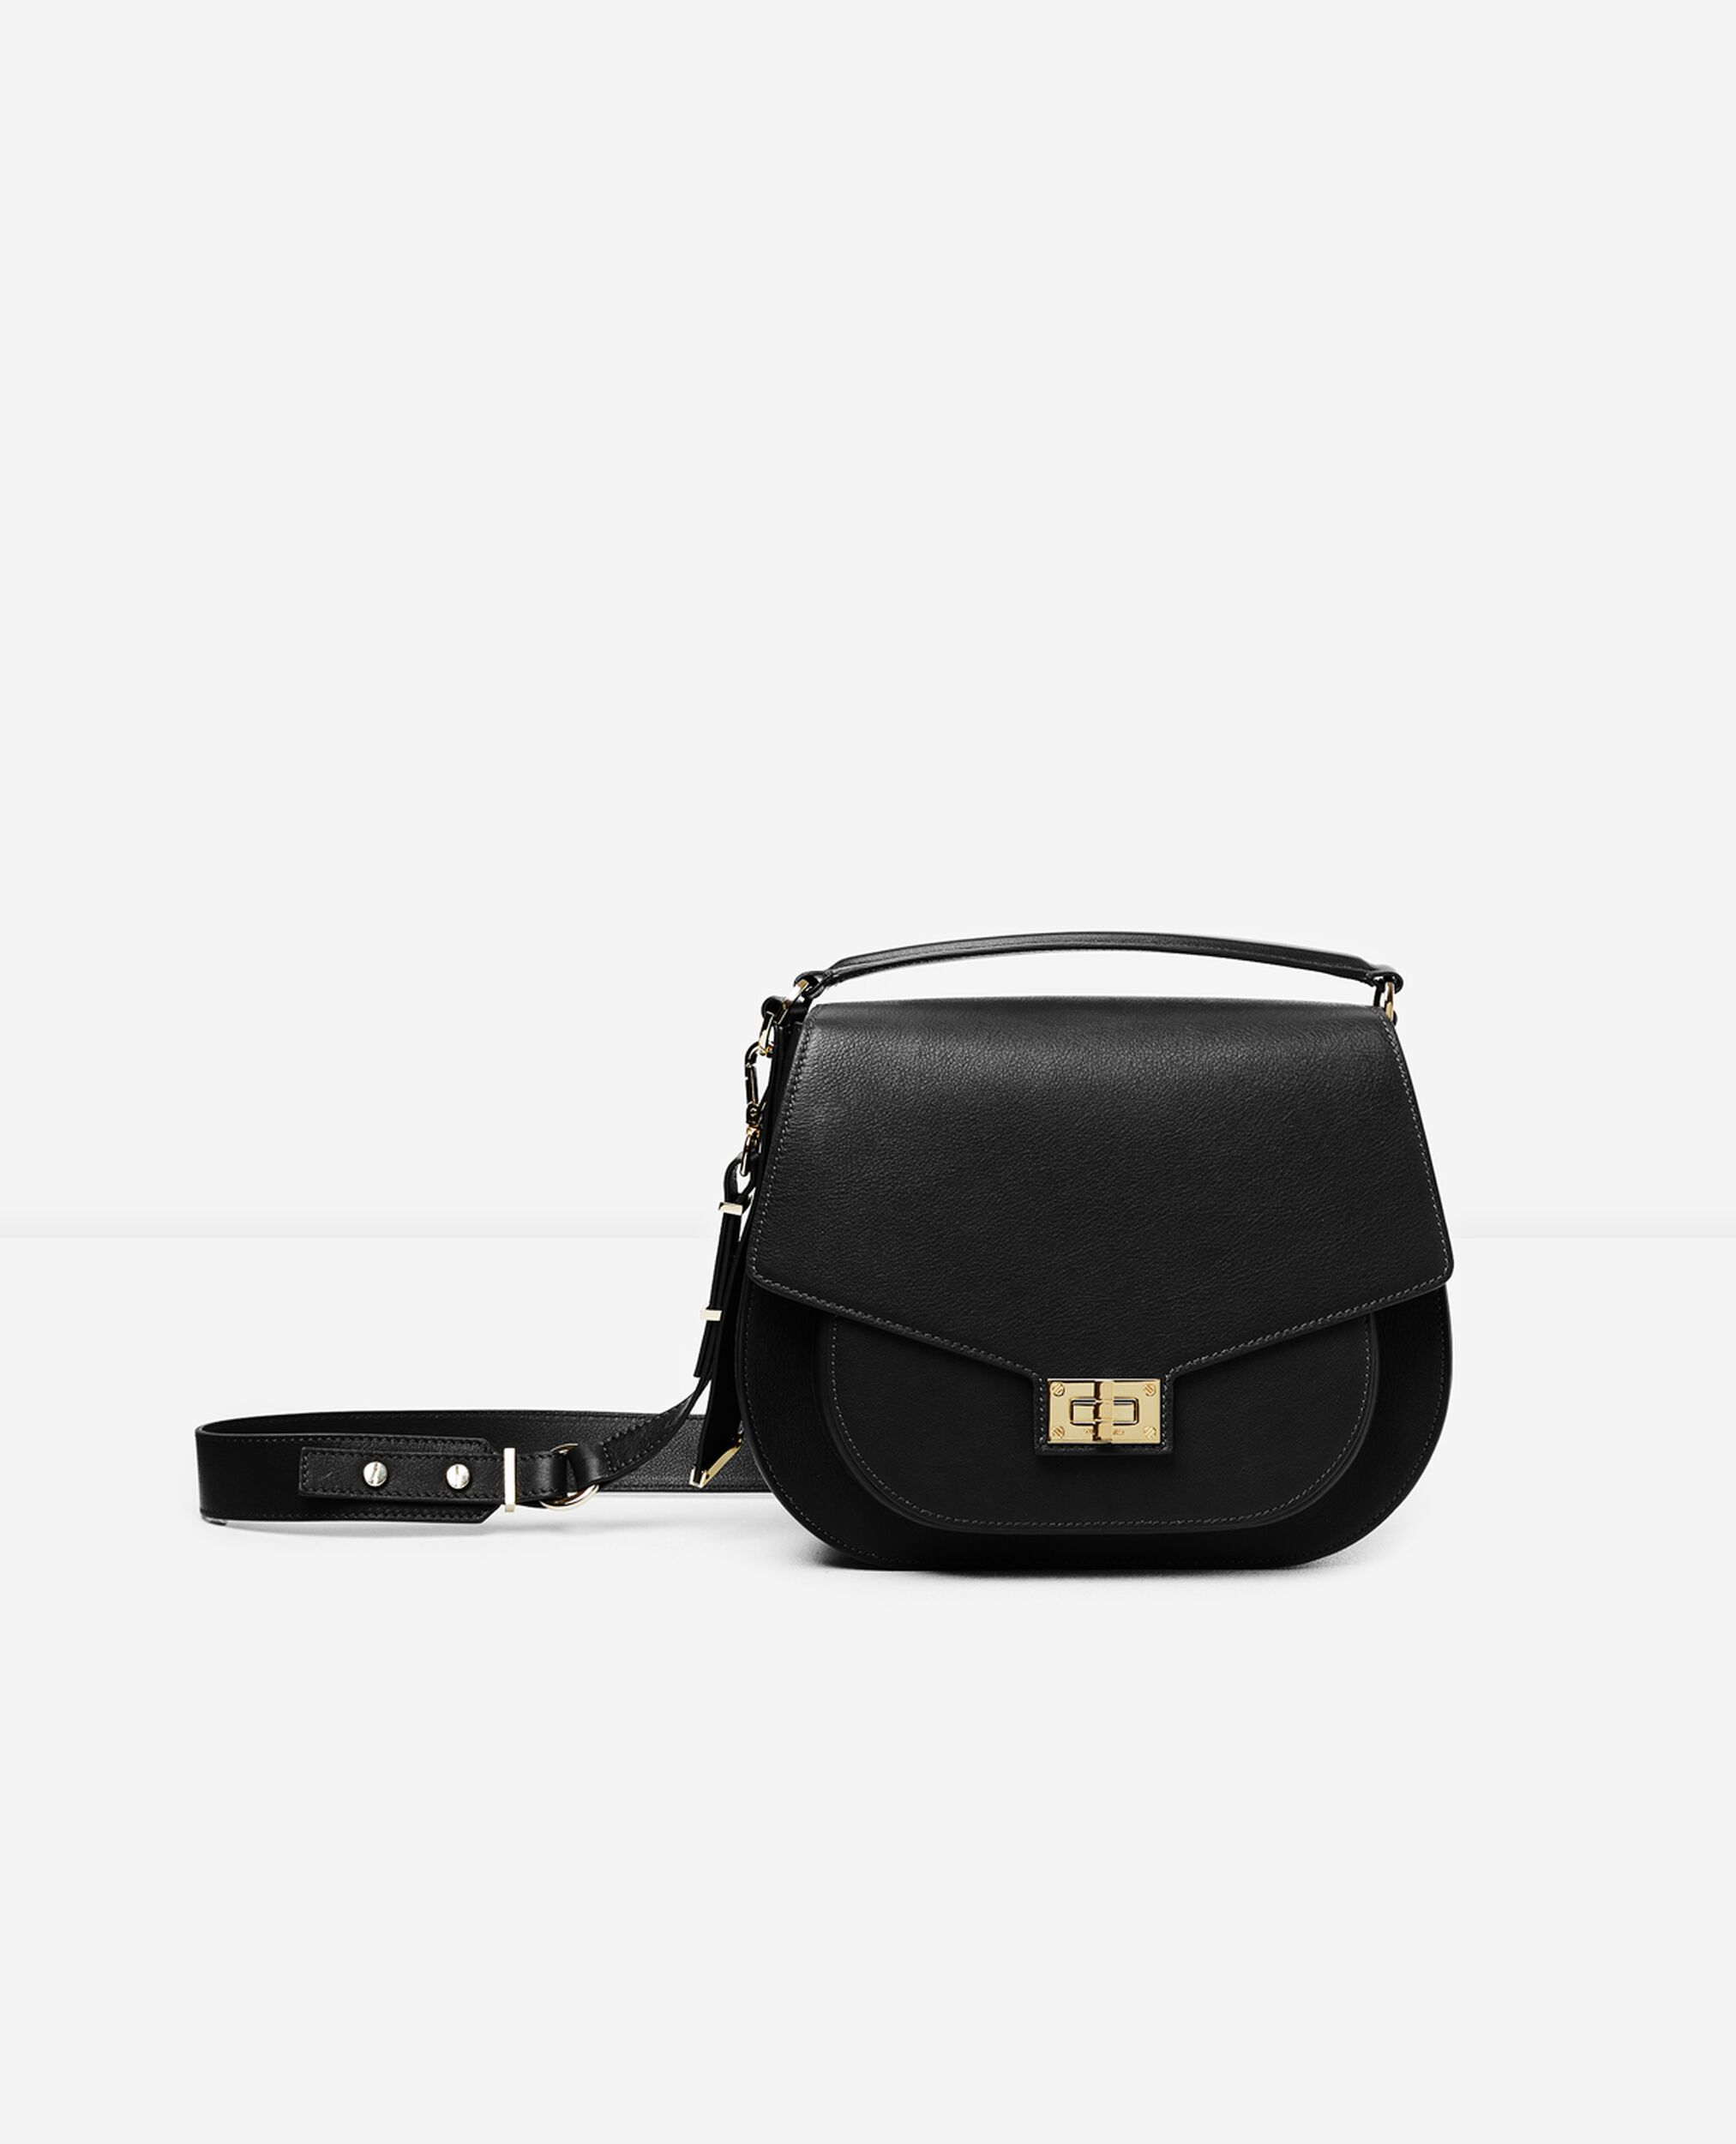 Hobo maxi leather bag in black | The Kooples - US